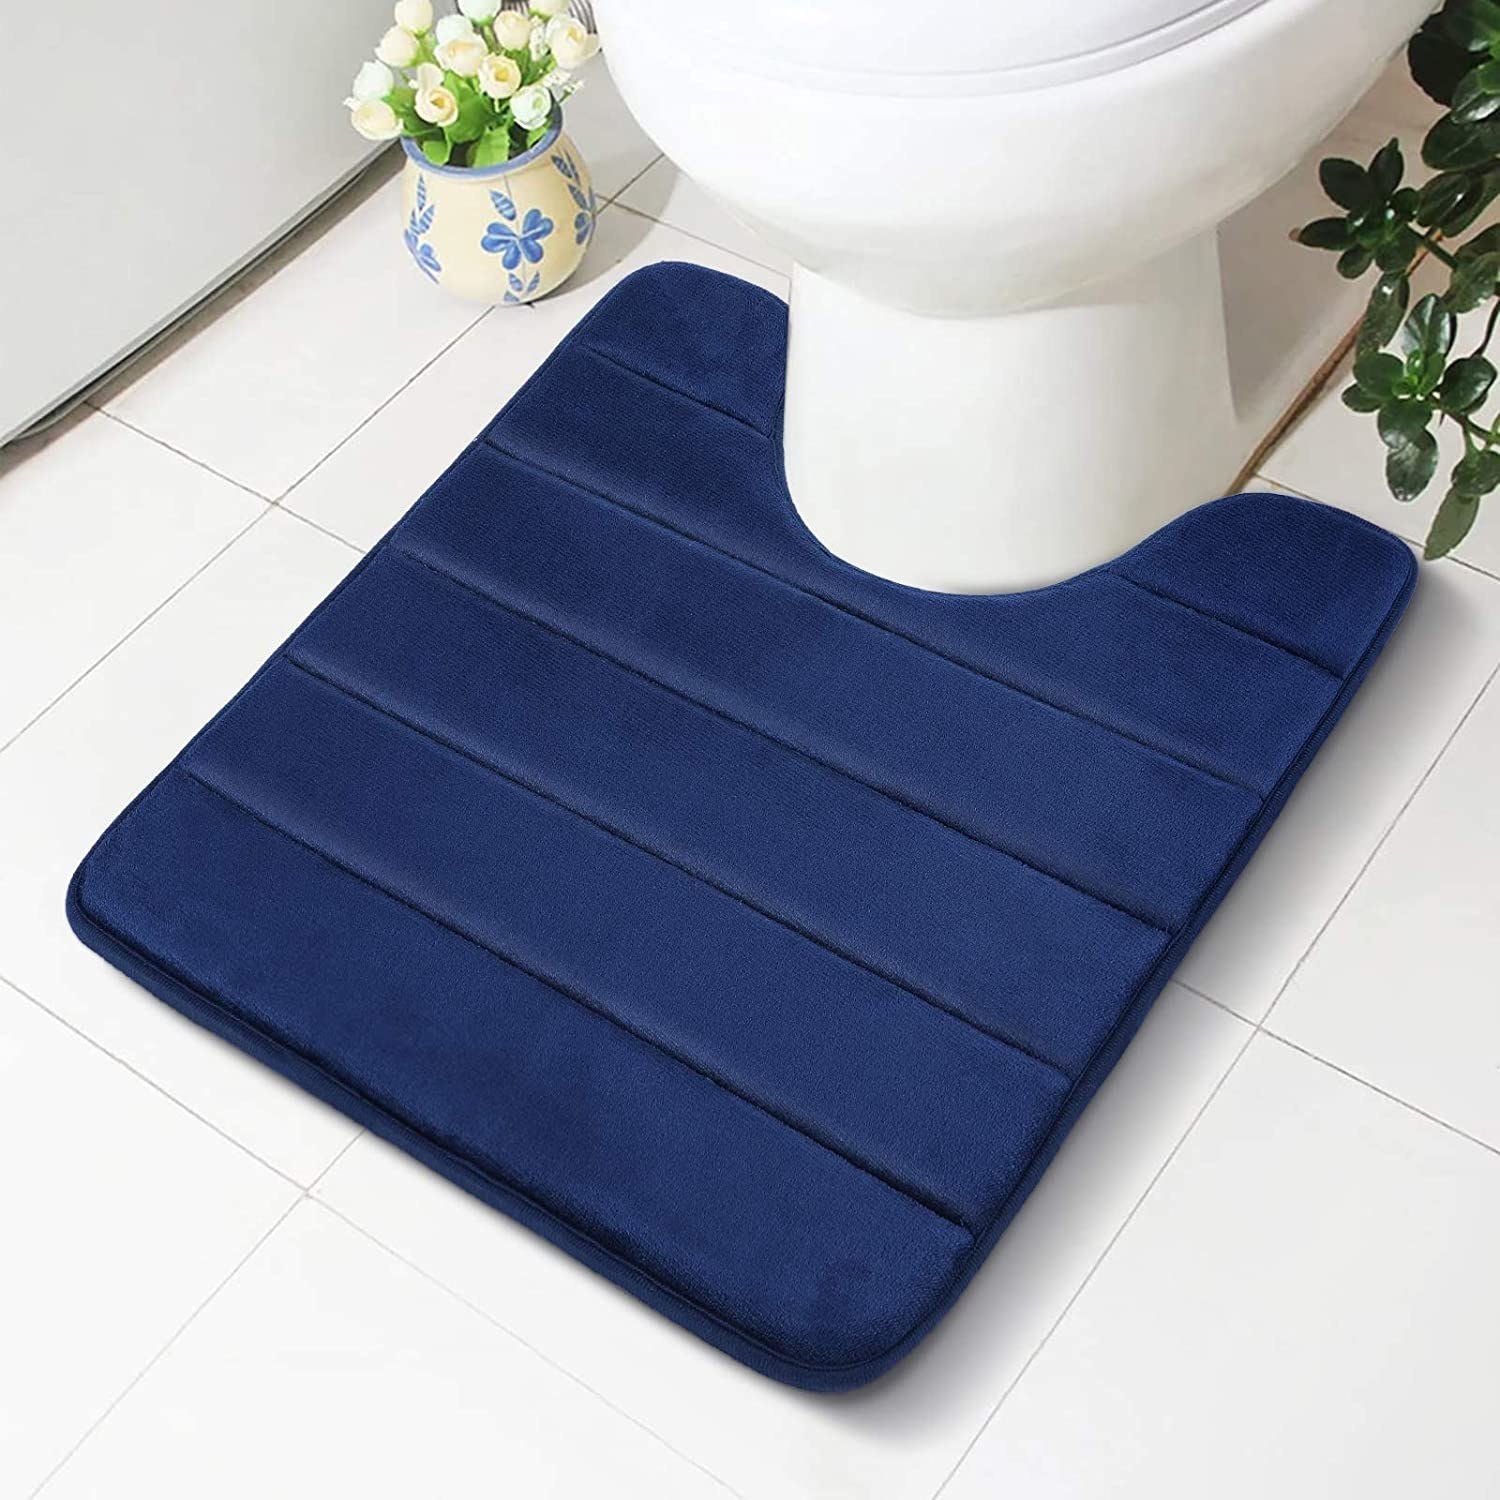 The toilet mat surrounding the base of a toilet